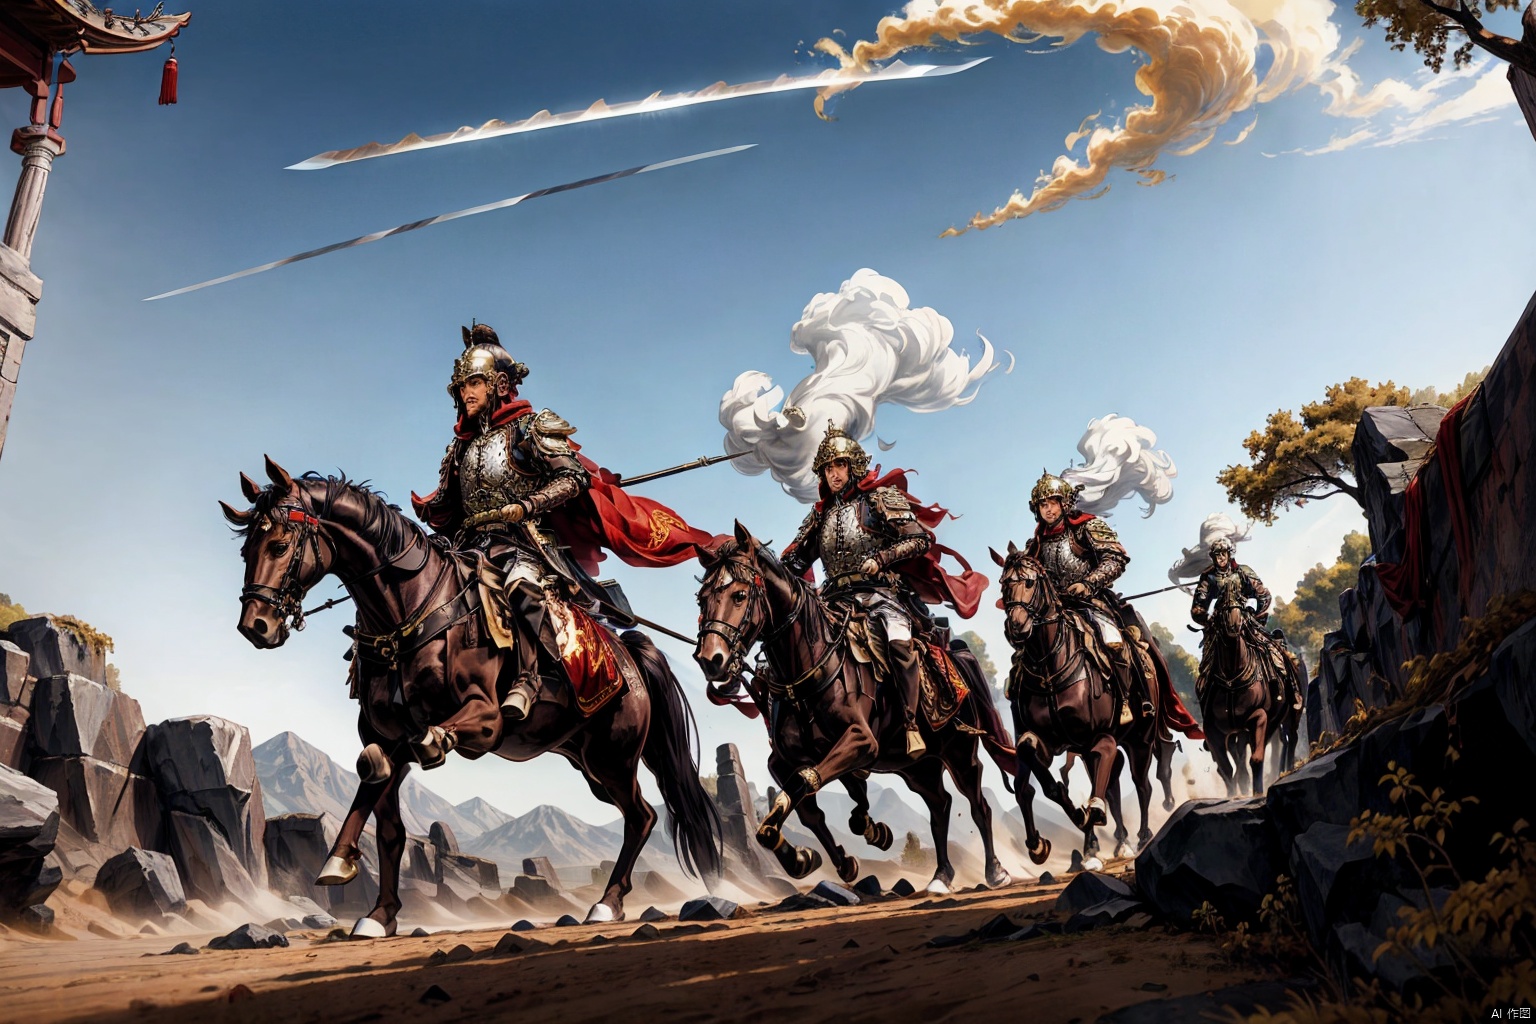 A man dressed in Chinese-style armor,a cavalryman,Chinese-style armor,helmet,white cloak,holding a sword,scabbard,*****,stubble,strong,bloodstains on the armor,riding a horse,charging,roaring,fighting,desert,sandstorm,several cavalrymen,chasing,fallen soldiers,bloodstains on the ground,architectural ruins,withered trees,rocks,desolate mountains,